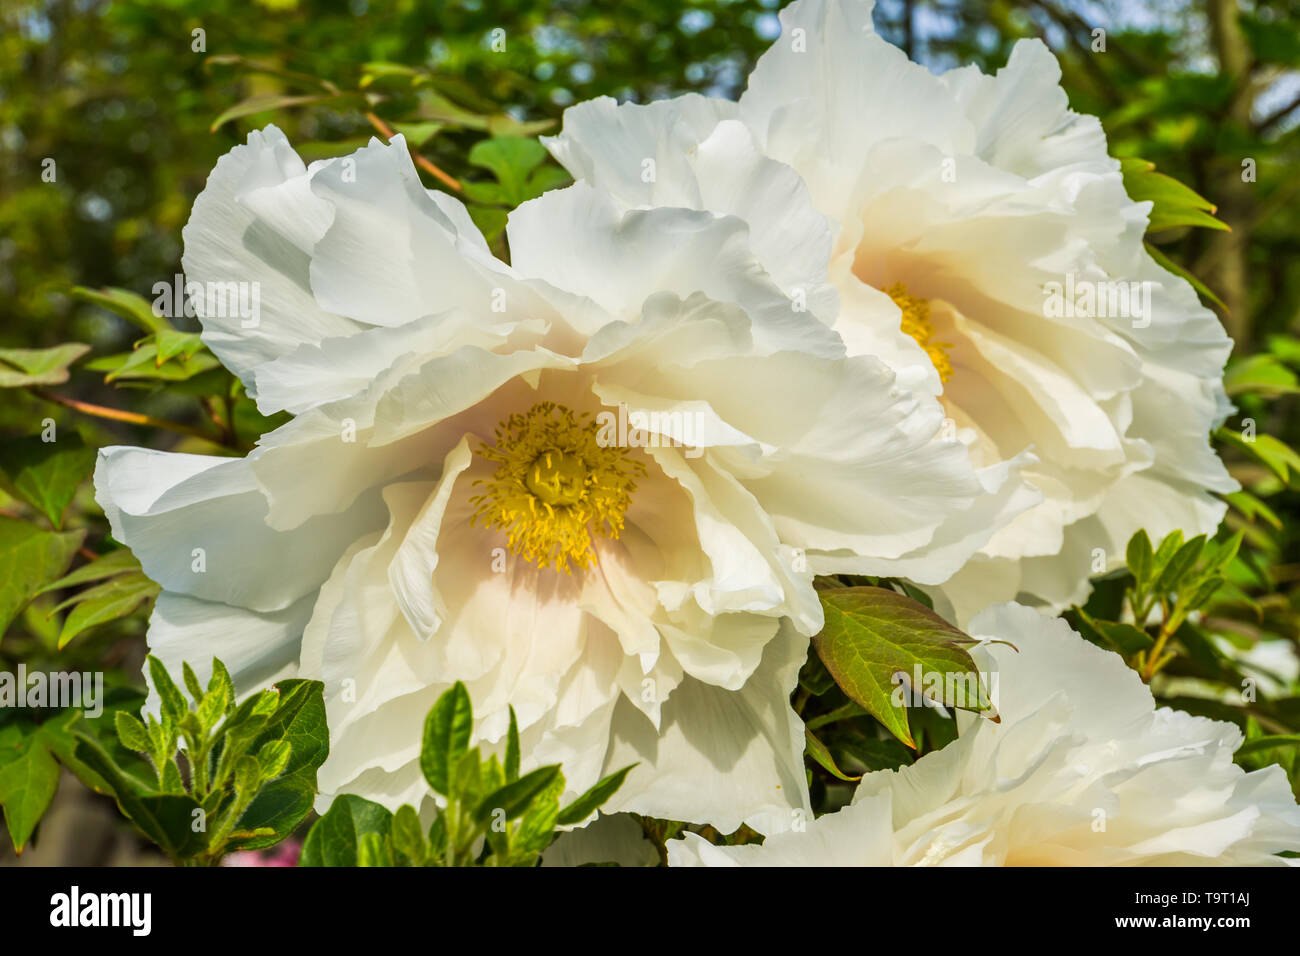 big white flowers blossoming during spring season, california tree poppy in closeup, nature background Stock Photo